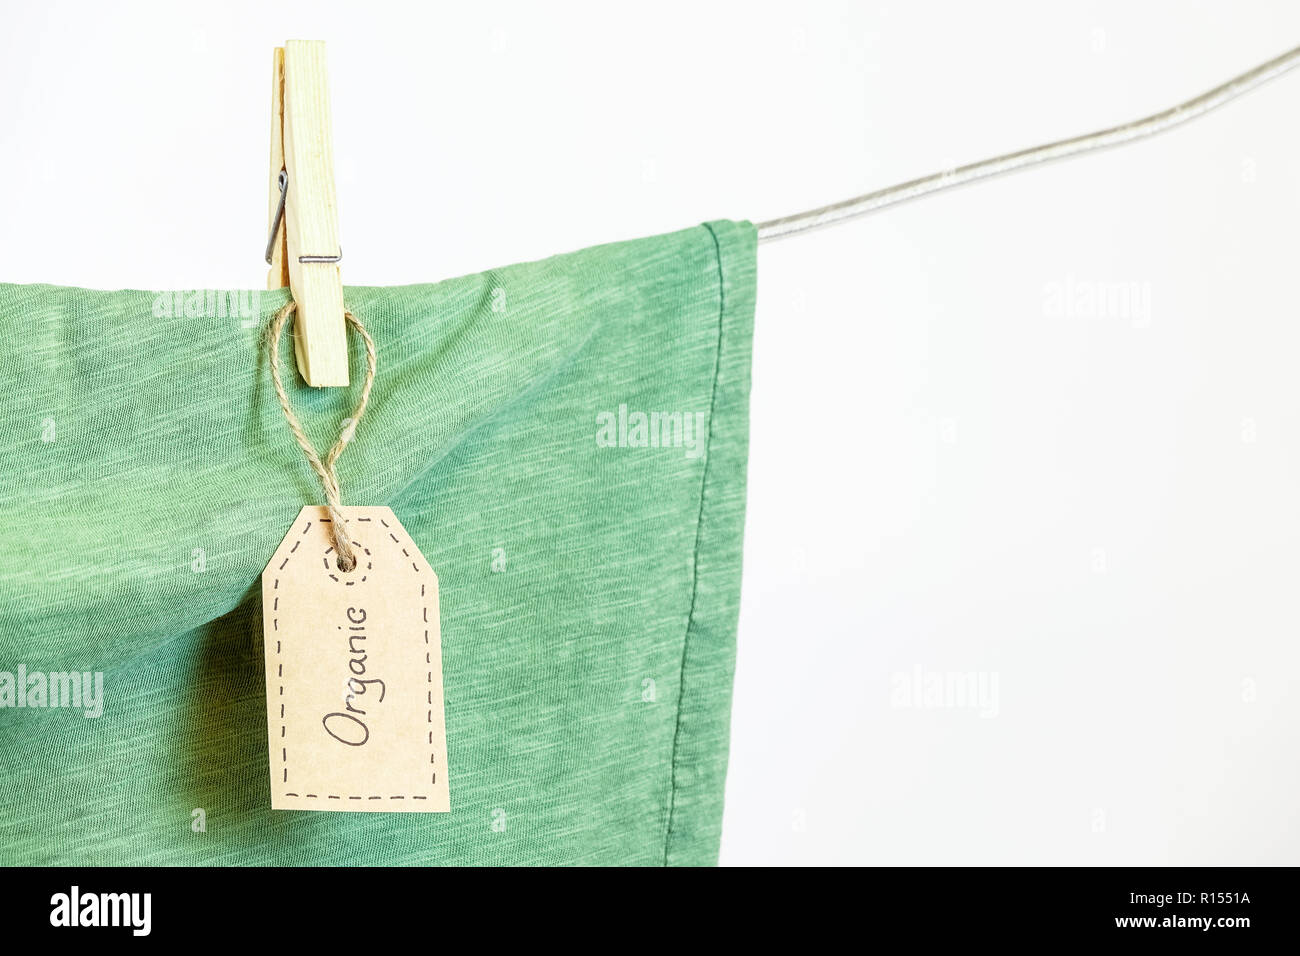 Organic clothes. Green t-shirt hanging on a clothesline. White background. Copy space. Stock Photo